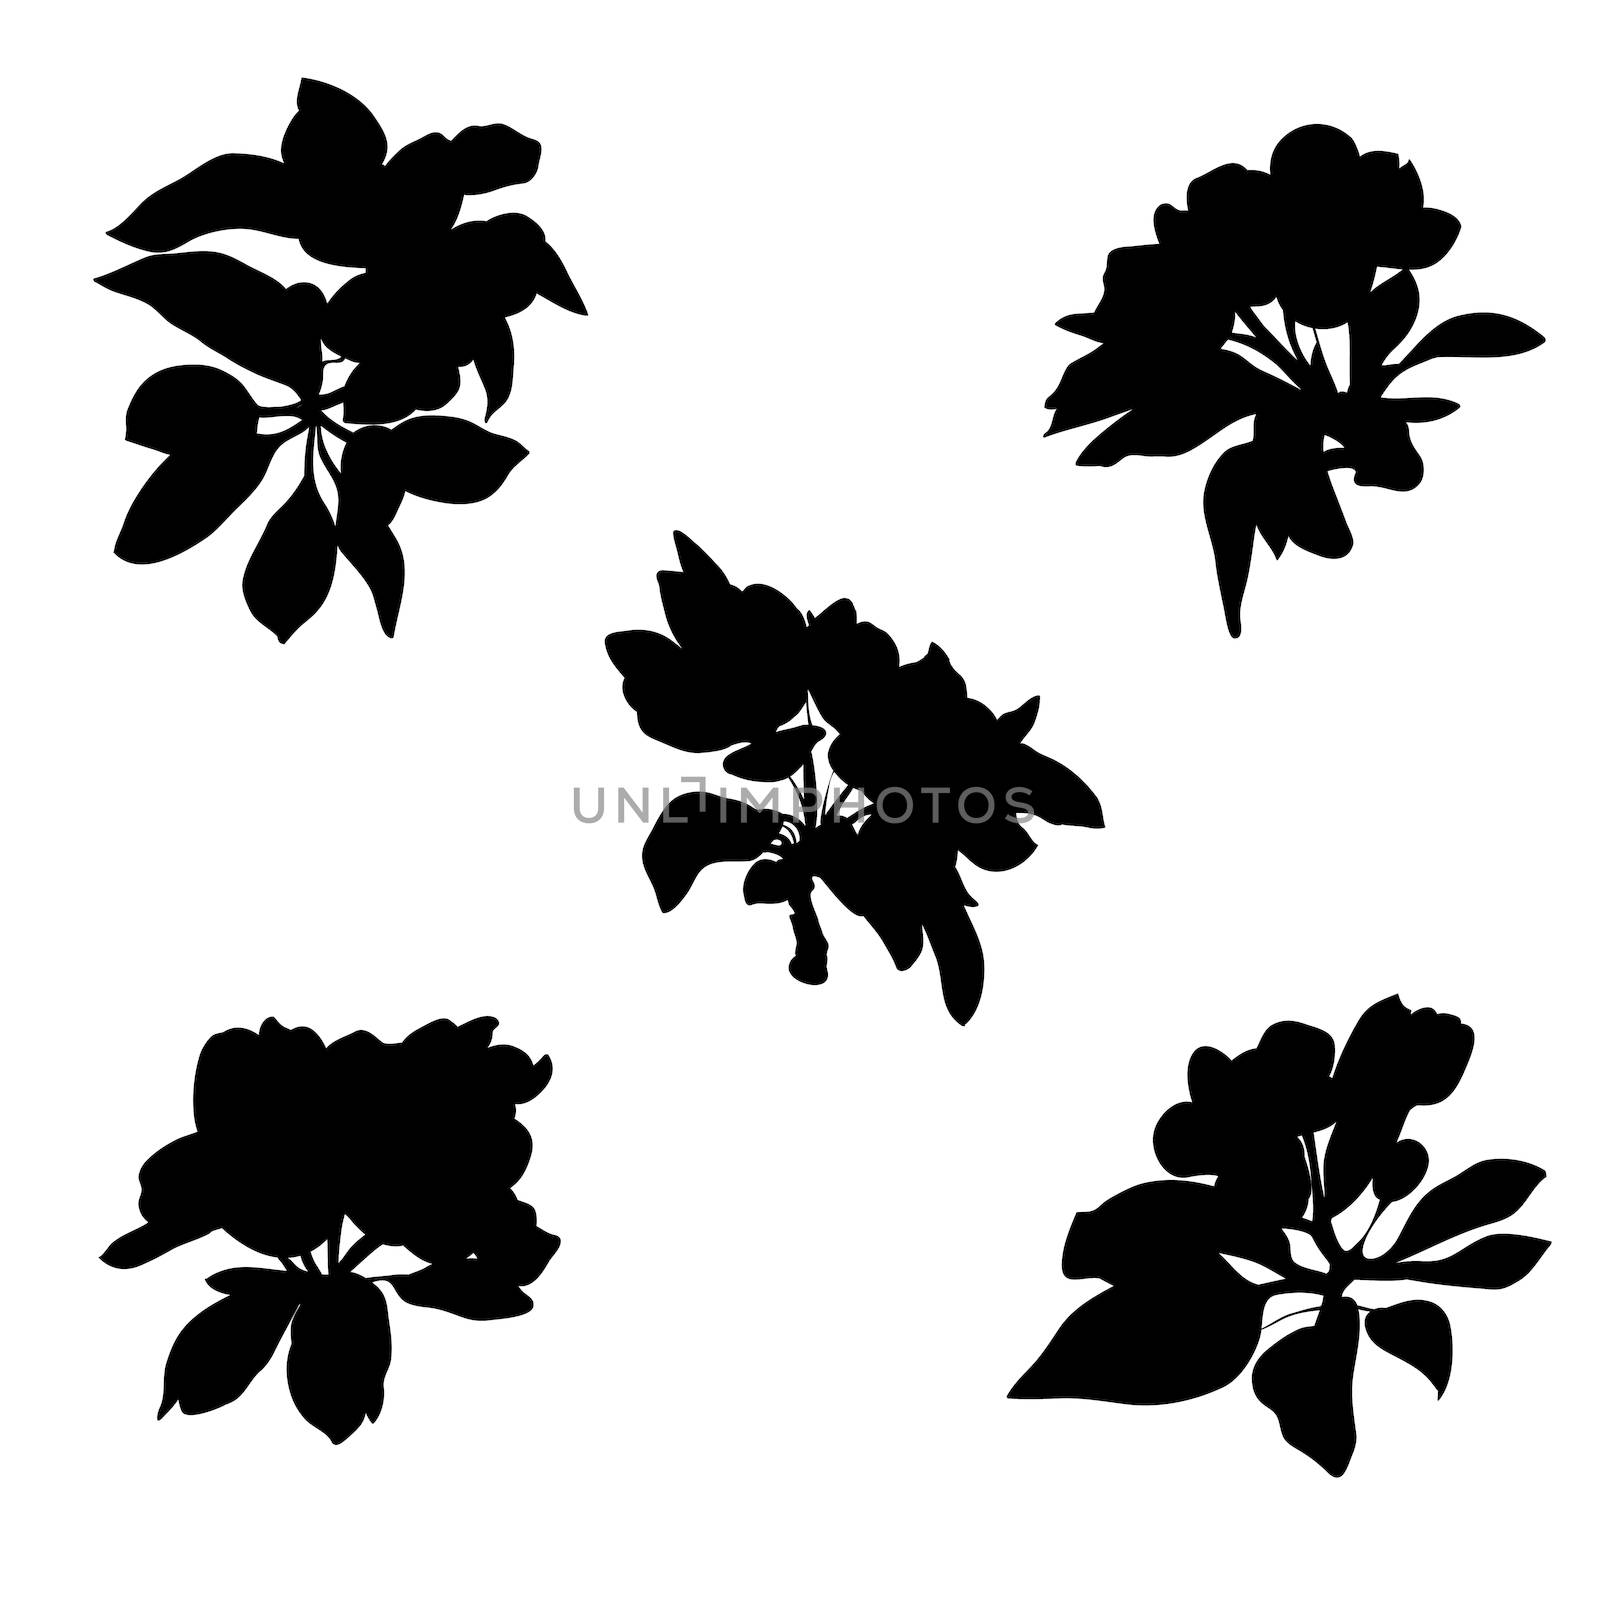 Apple tree flower silhouettes isolated on white